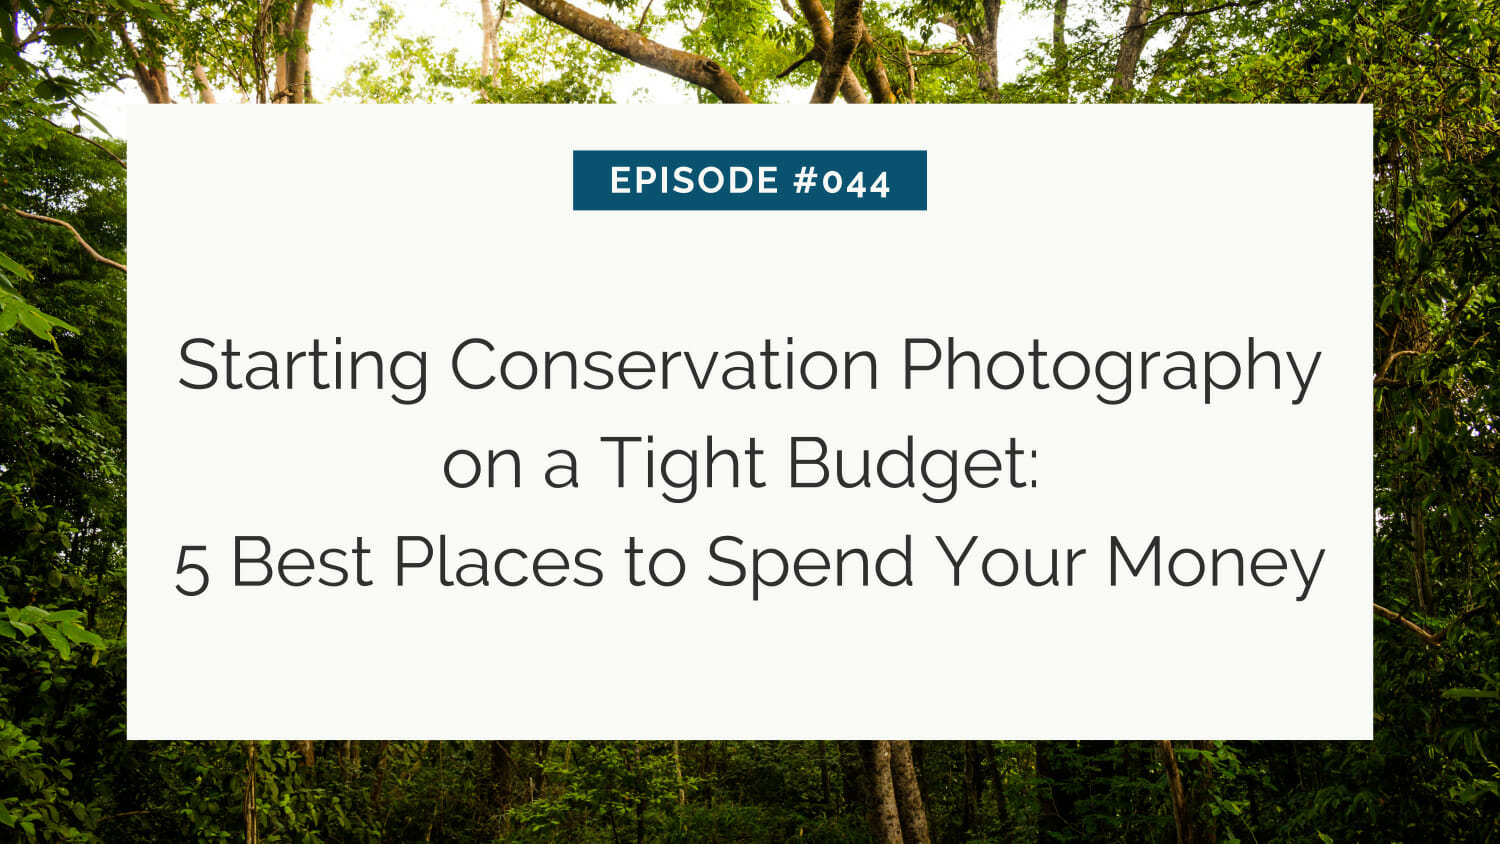 An informative slide about beginning conservation photography with budgeting tips, titled 'starting conservation photography on a tight budget: 5 best places to spend your money,' set against a lush forest backdrop.